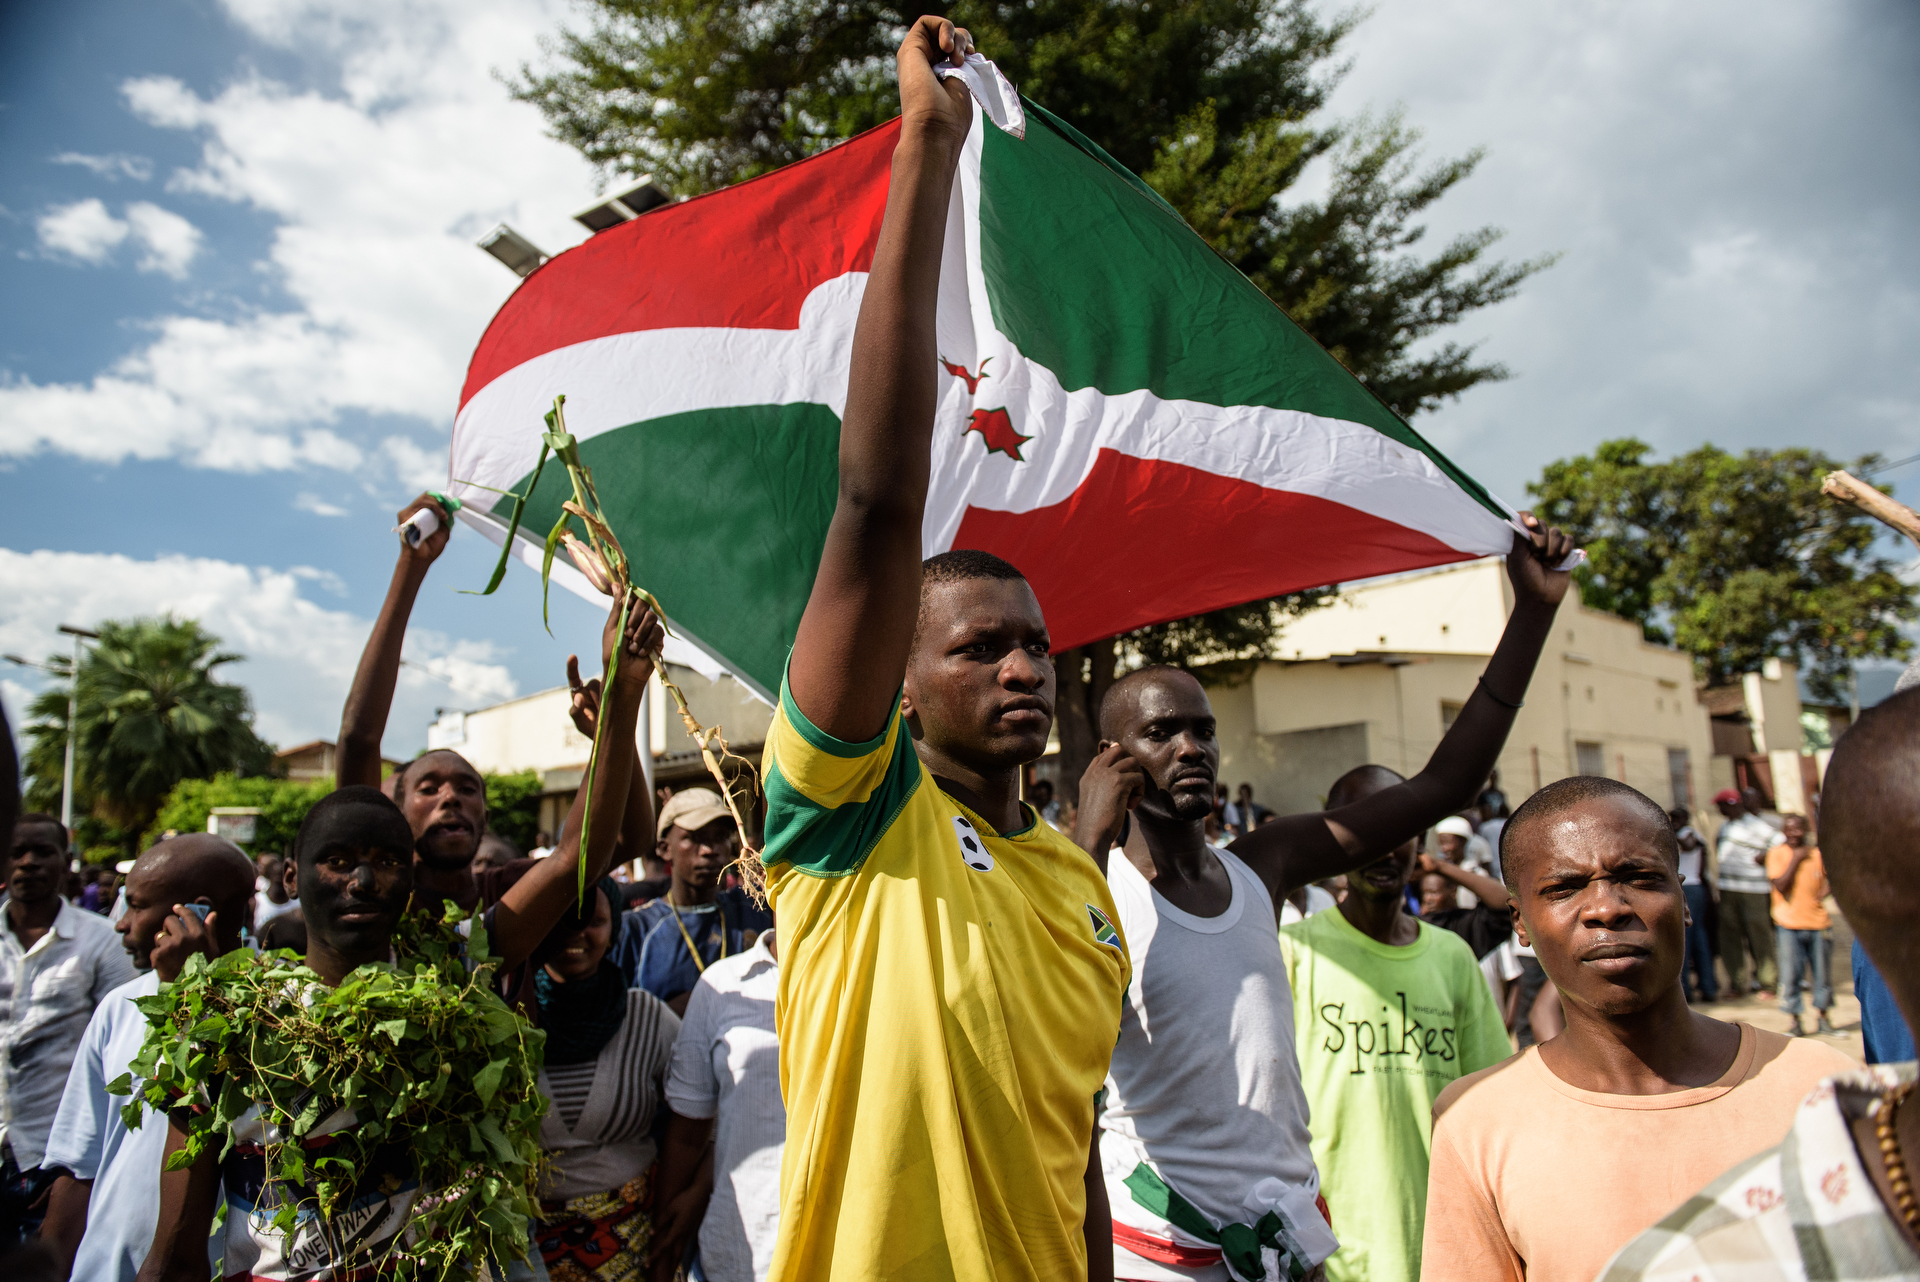  Following the radio announcement by Major General Godefroid Niyombare that President Nkurunziza was overthrown, people took to the streets to celebrate, waving branches, beeping car horns, and parading through Bujumbura on 13 May. 